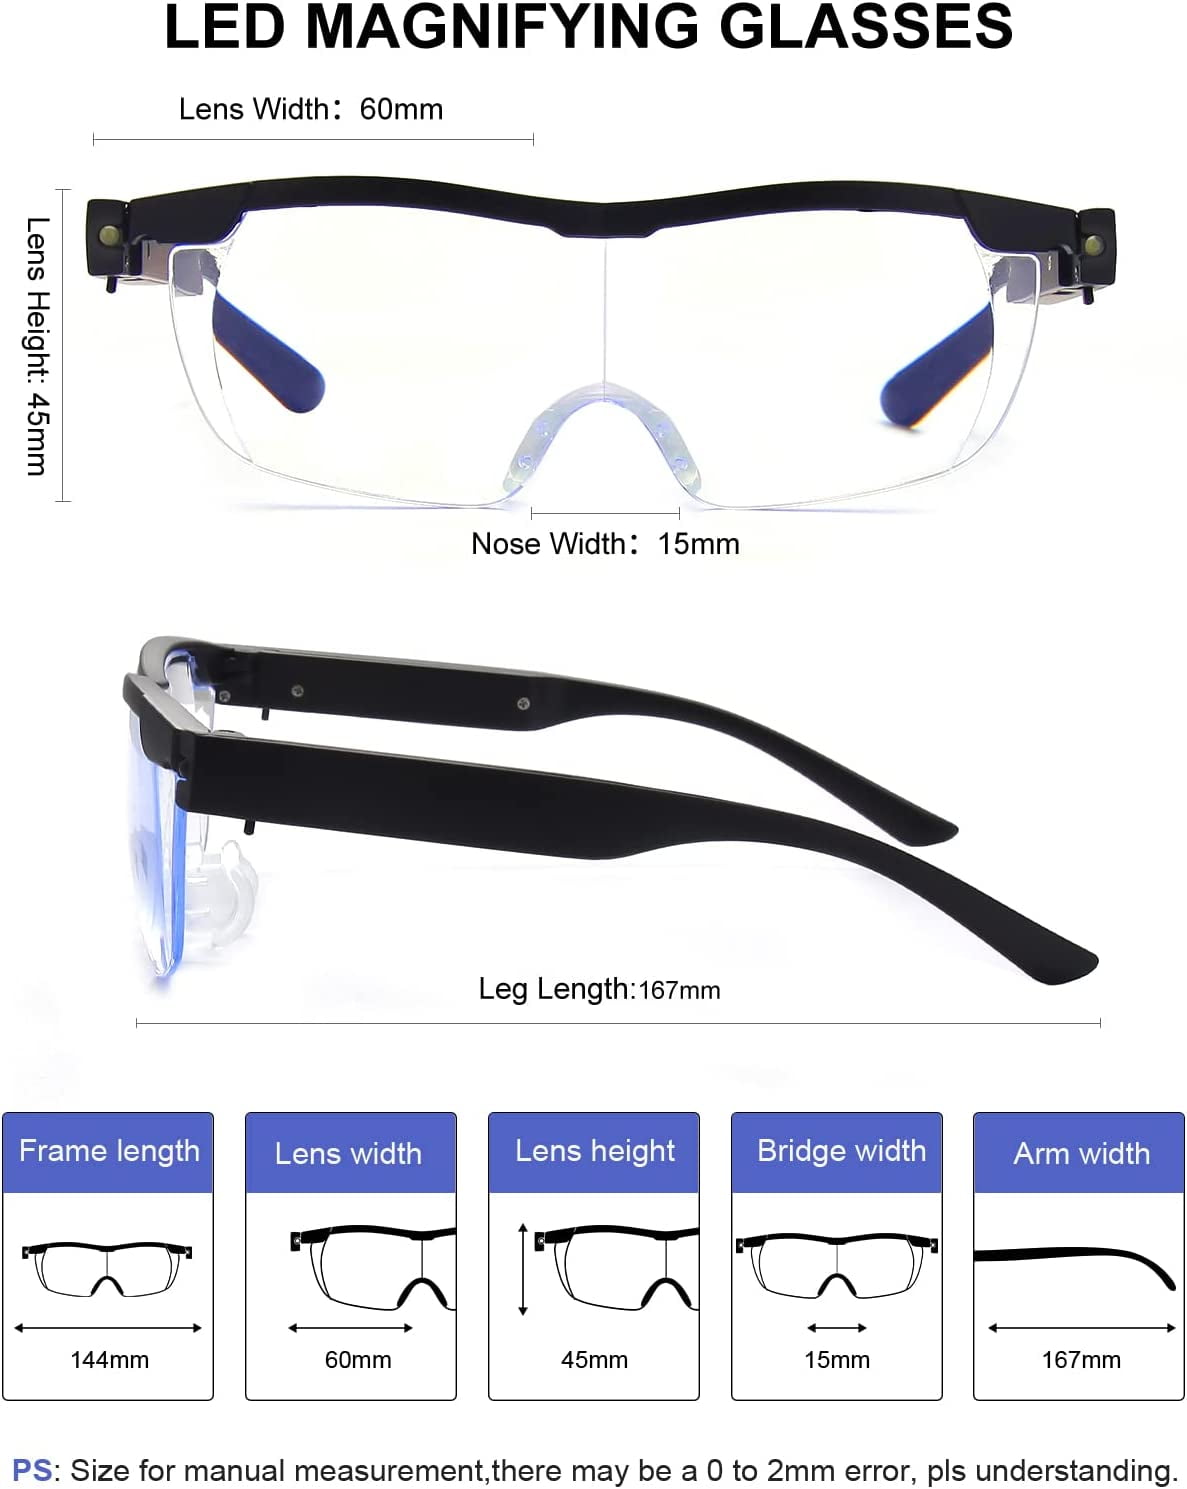 Glasses With Magnifying LED Light - Vision Eye Sight Enhancing Reading  Eyewear - 160% Magnification Lenses - UPGRADED USB Rechargeable